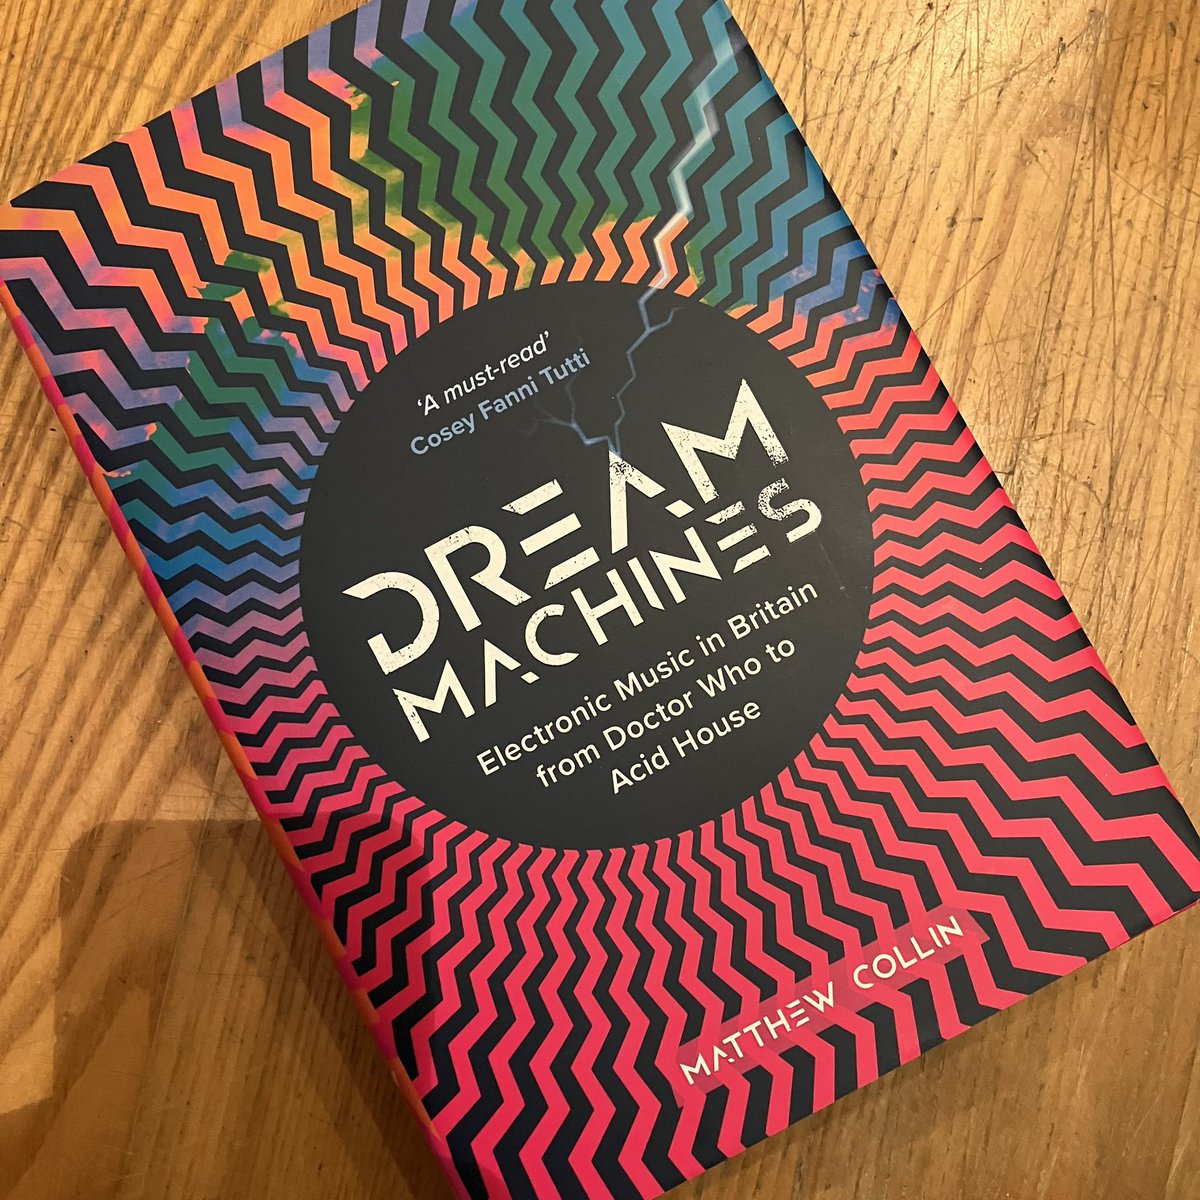 This looks a fascinating and comprehensive trip through post-war electronic music. Can’t wait to read it! Thank you @OmnibusPress